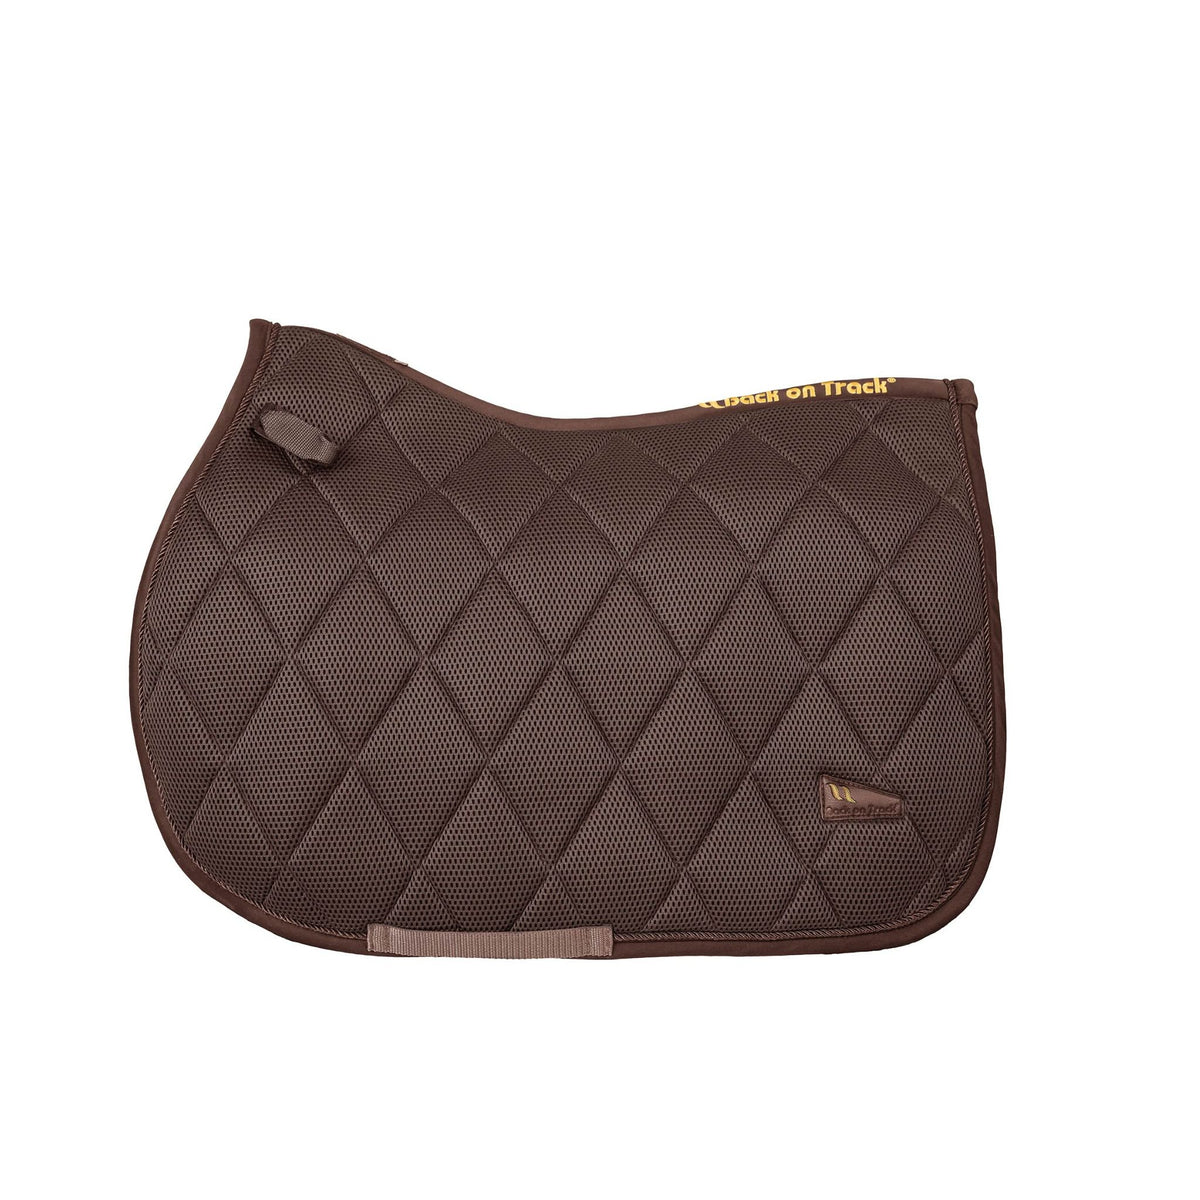 Brown mesh saddle pad with Velcro attachments and leather detail.